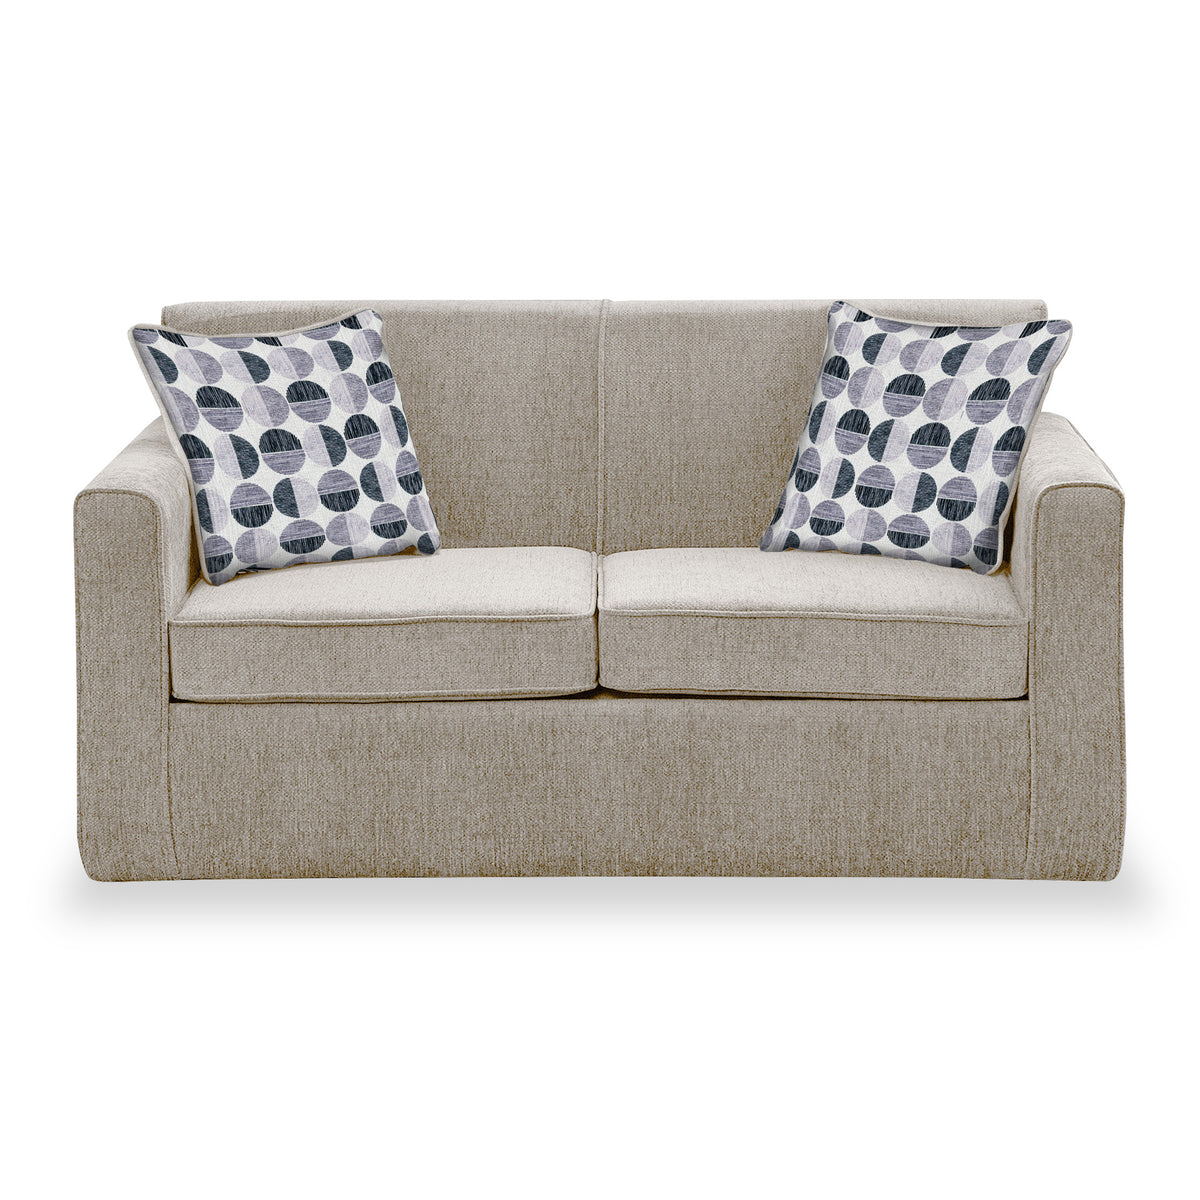 Welton Oatmeal Soft Weave 2 Seater Sofa Bed with Refus Mono